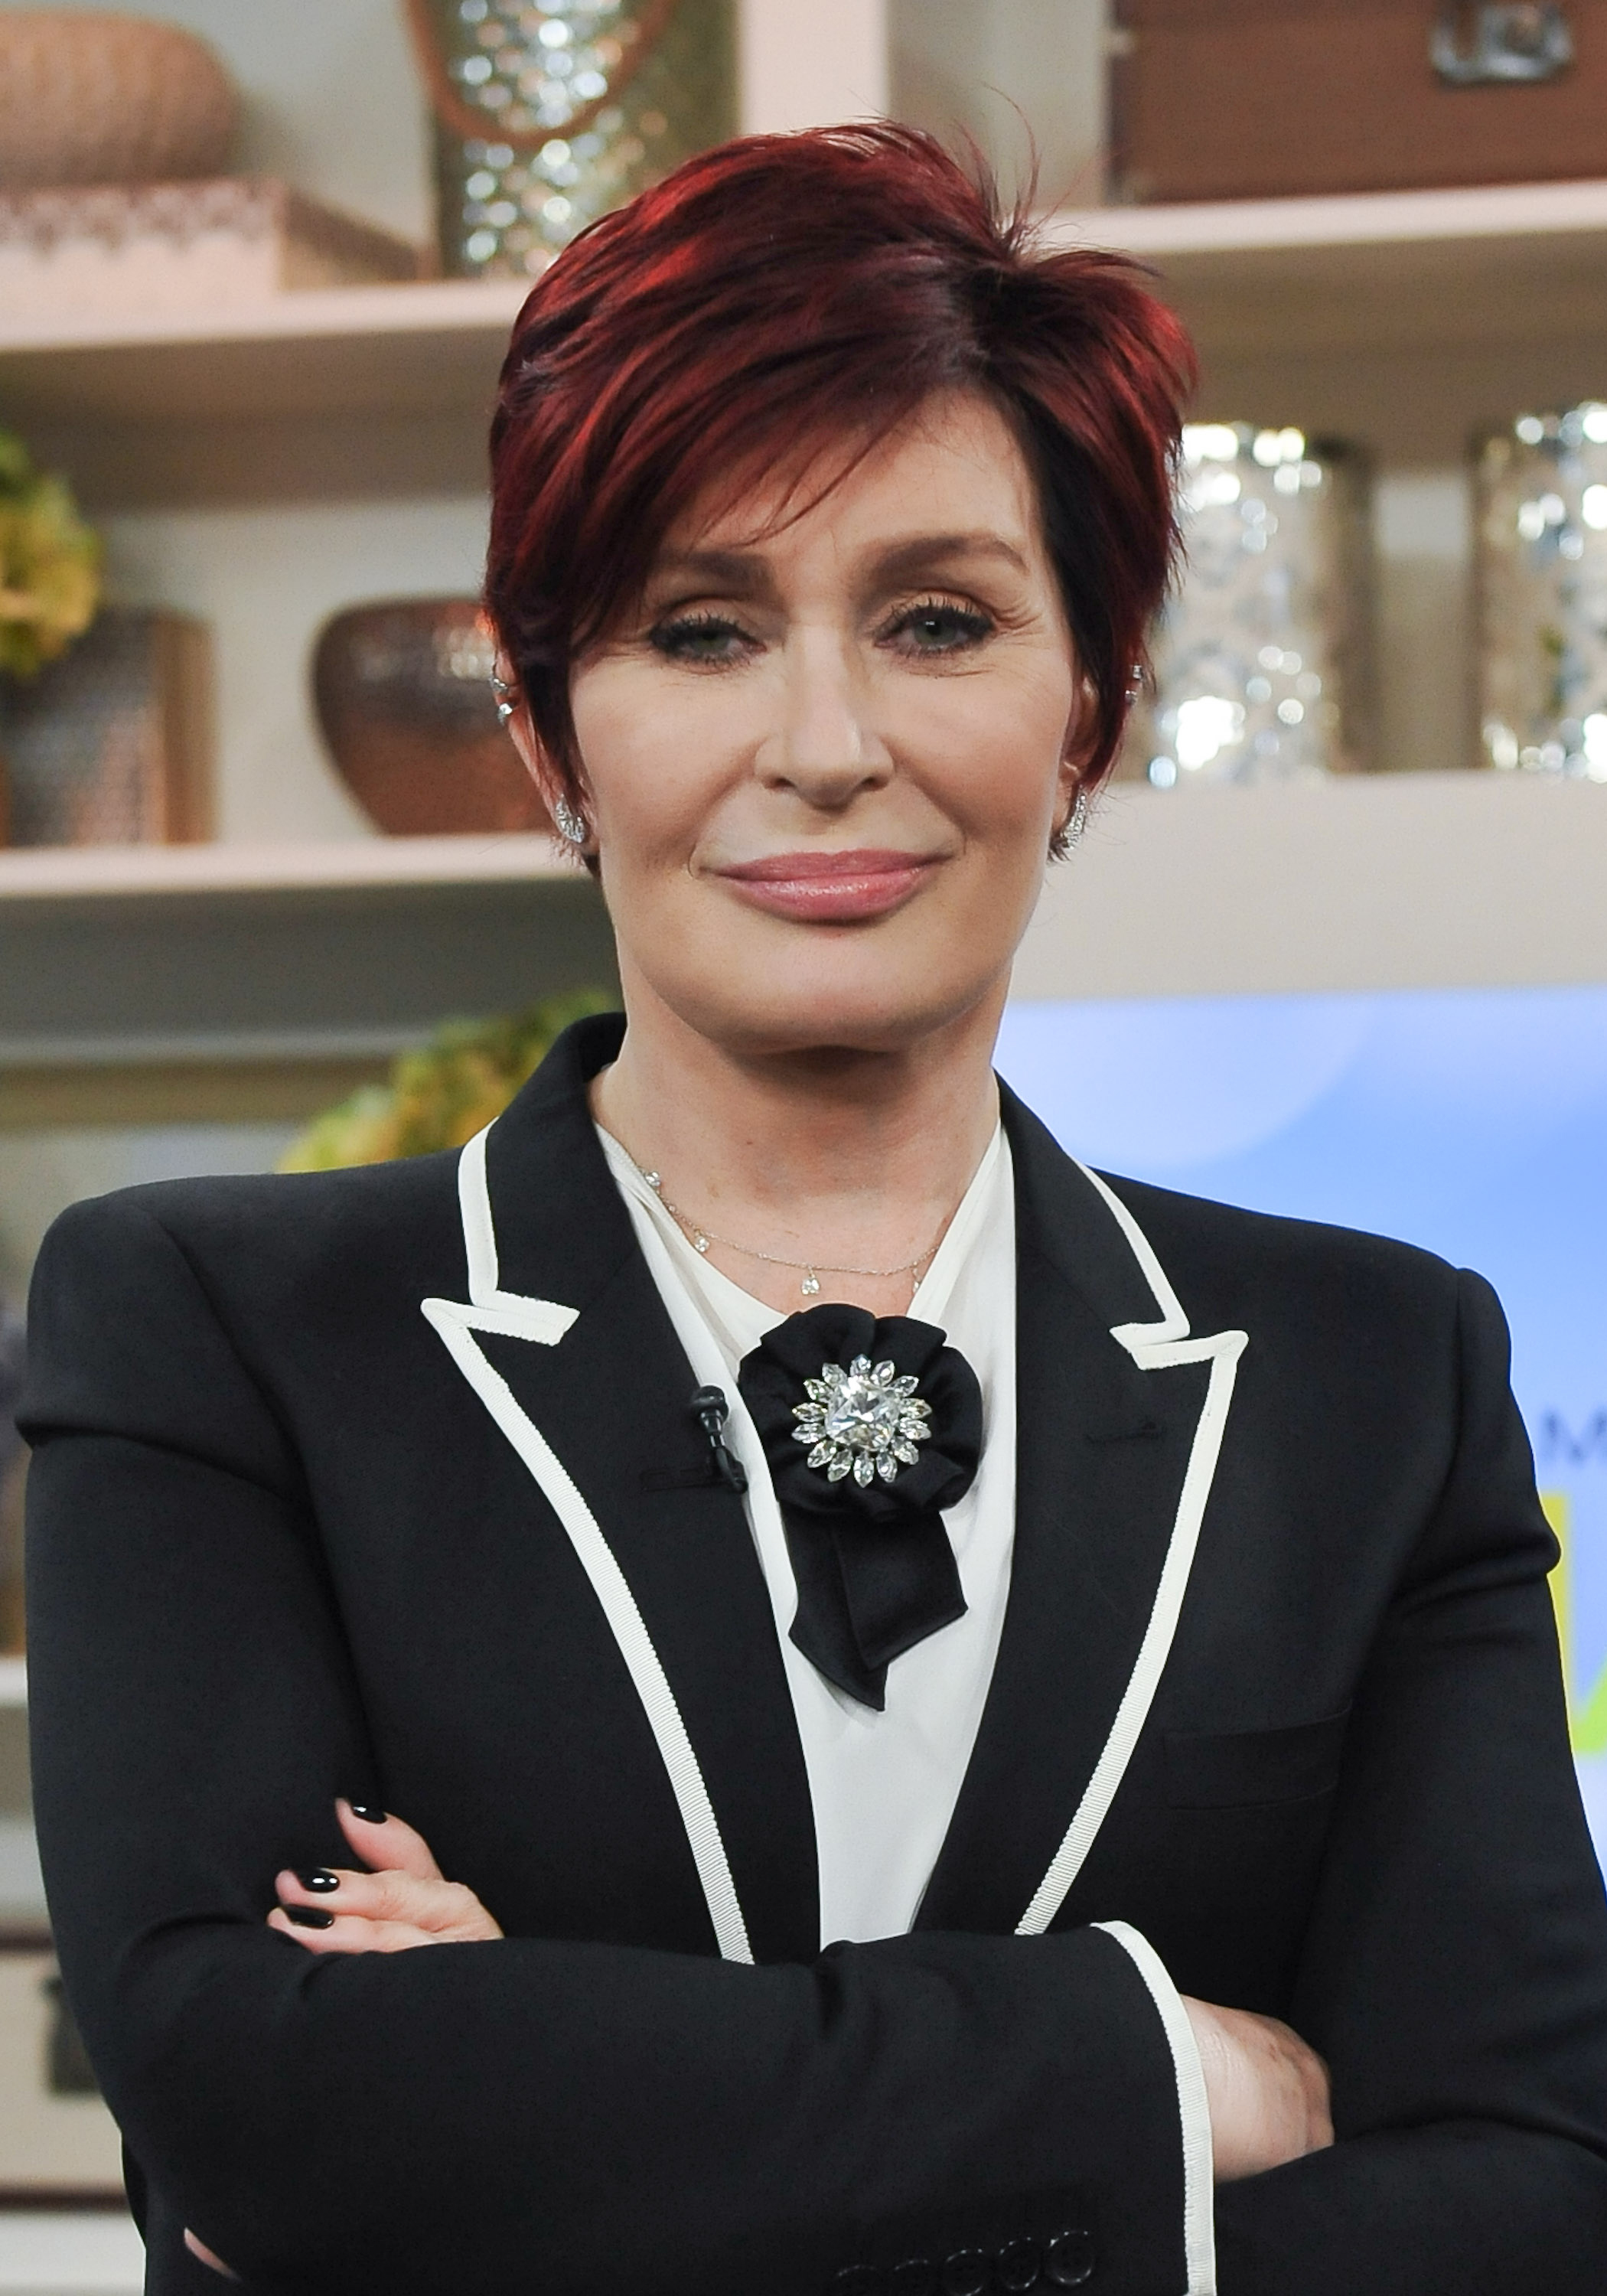 TV personality Sharon Osbourne appears on CTV's "The Marilyn Denis Show" at Bell Media Headquarters on May 15, 2015 in Toronto. (Sam Santos—WireImage/Getty Images)